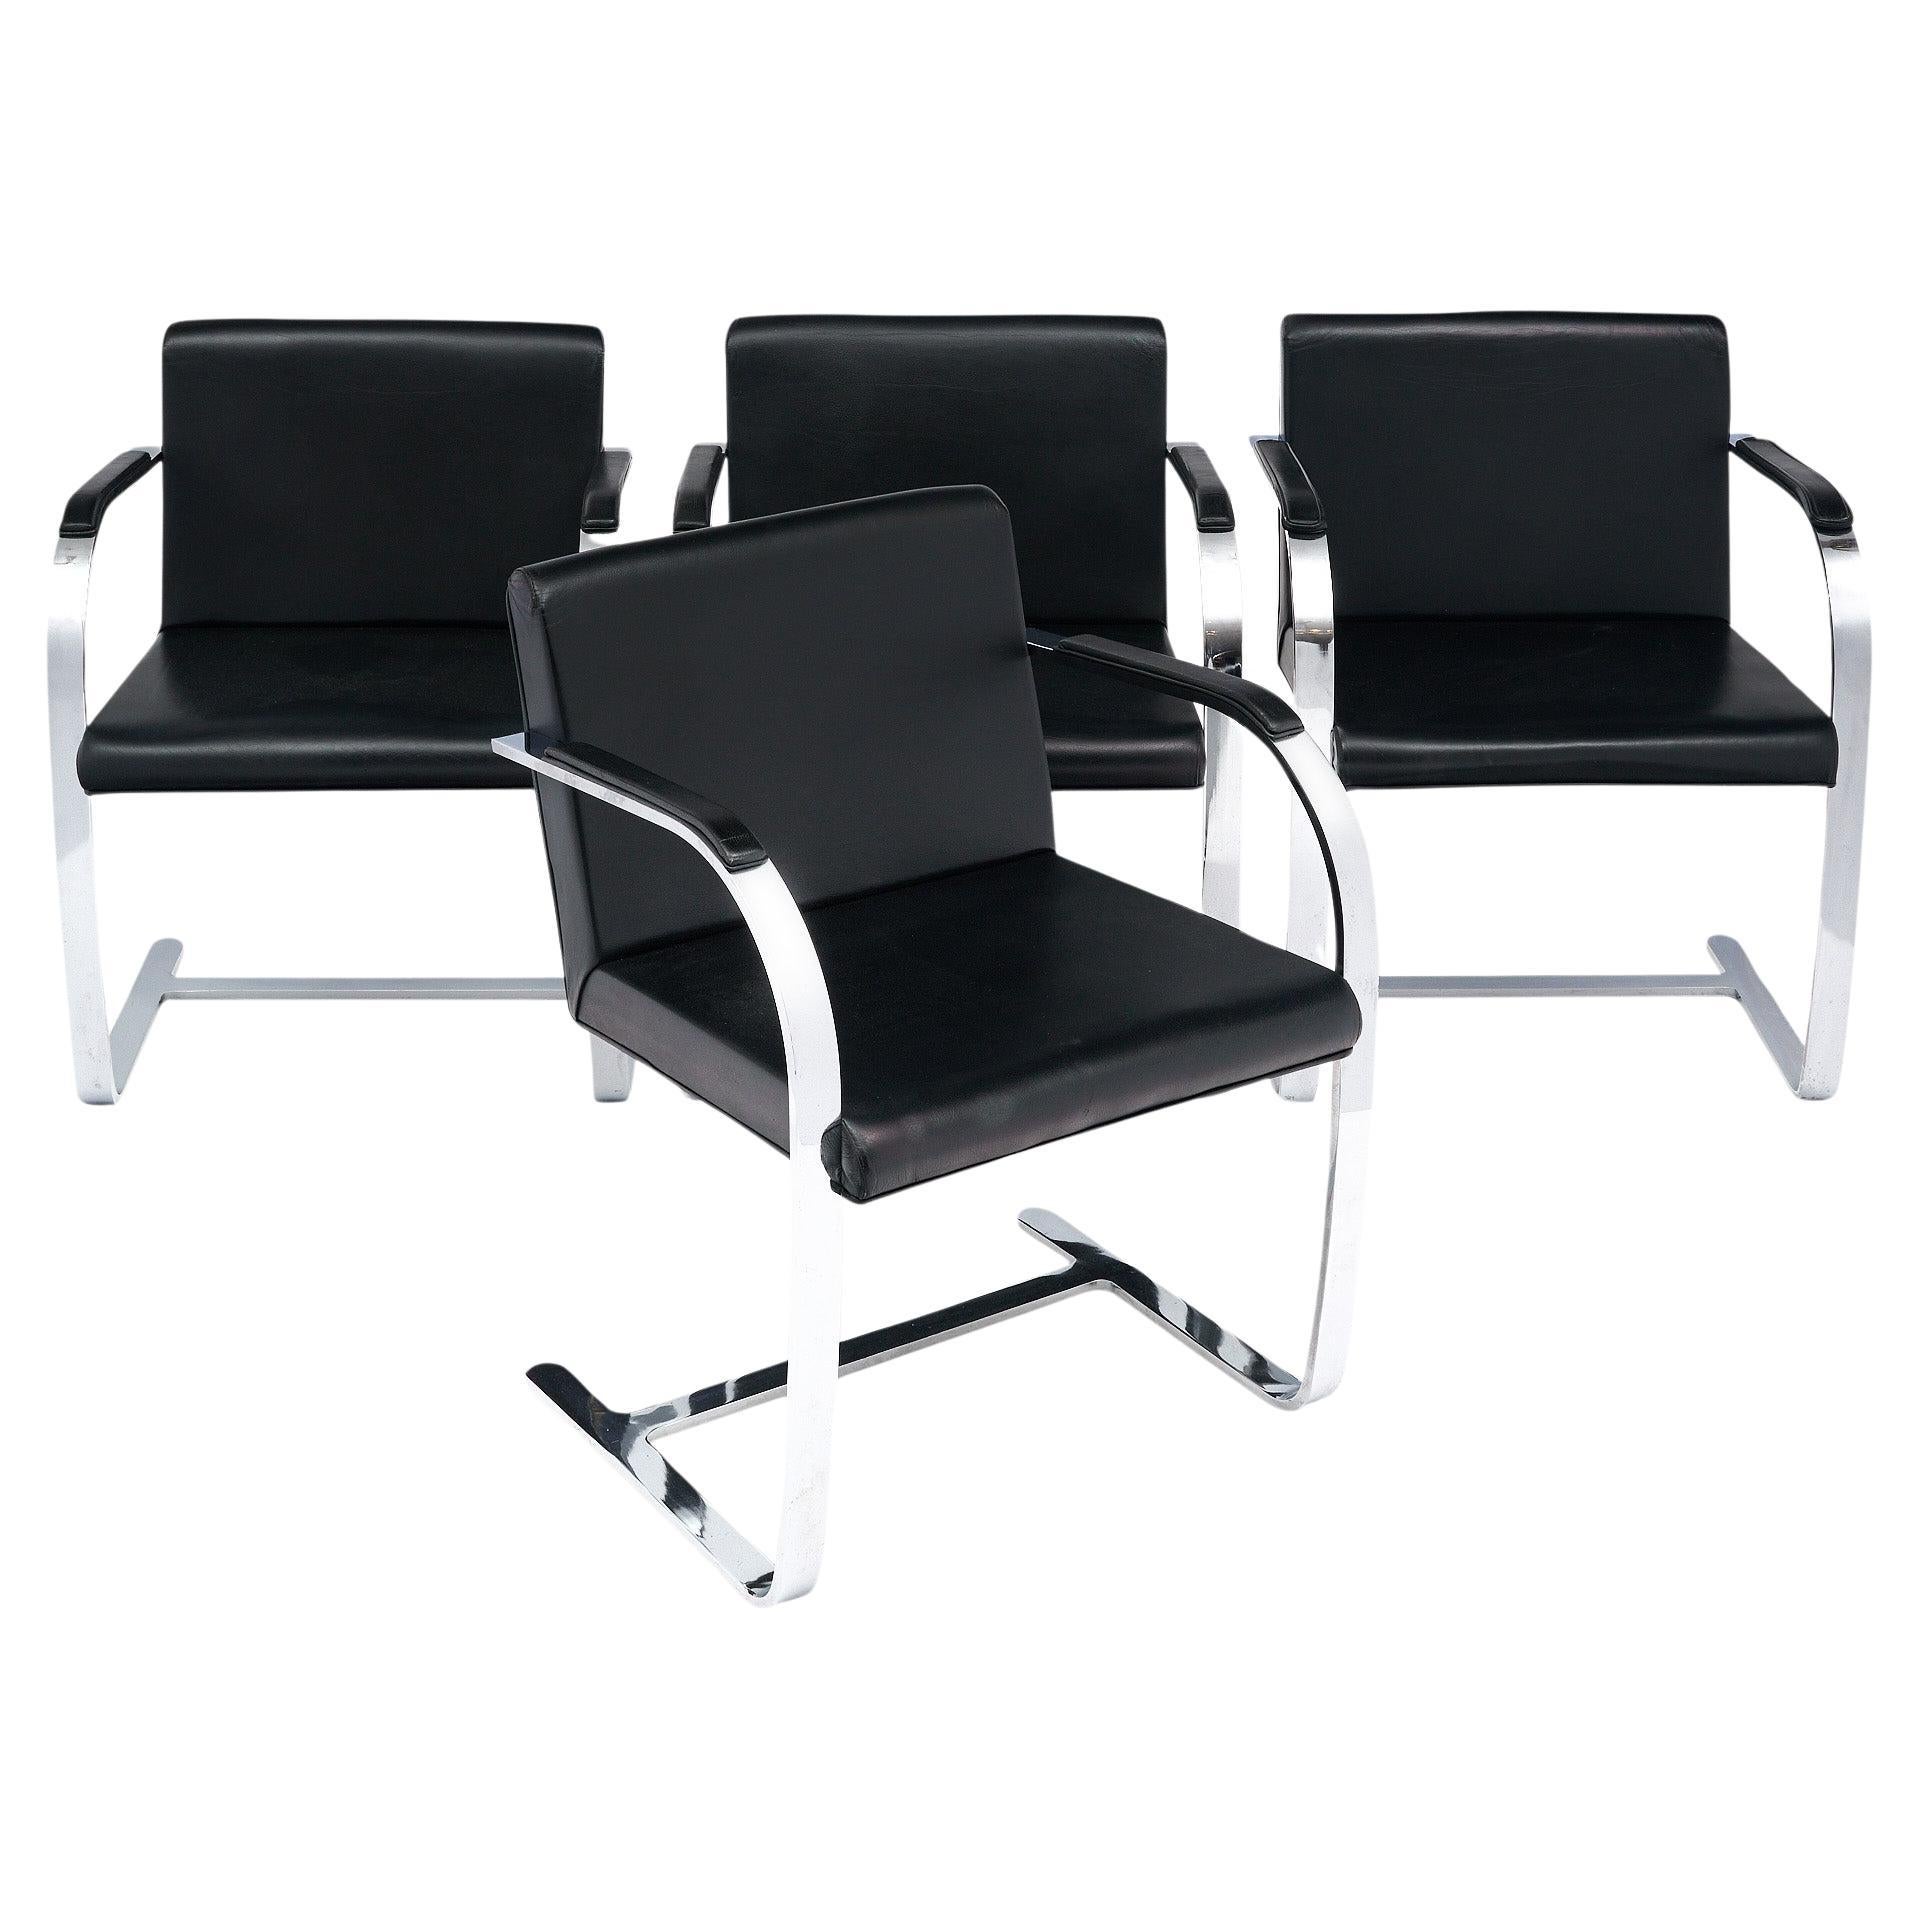 Set of Brno Chairs by Mies van der Rohe For Sale